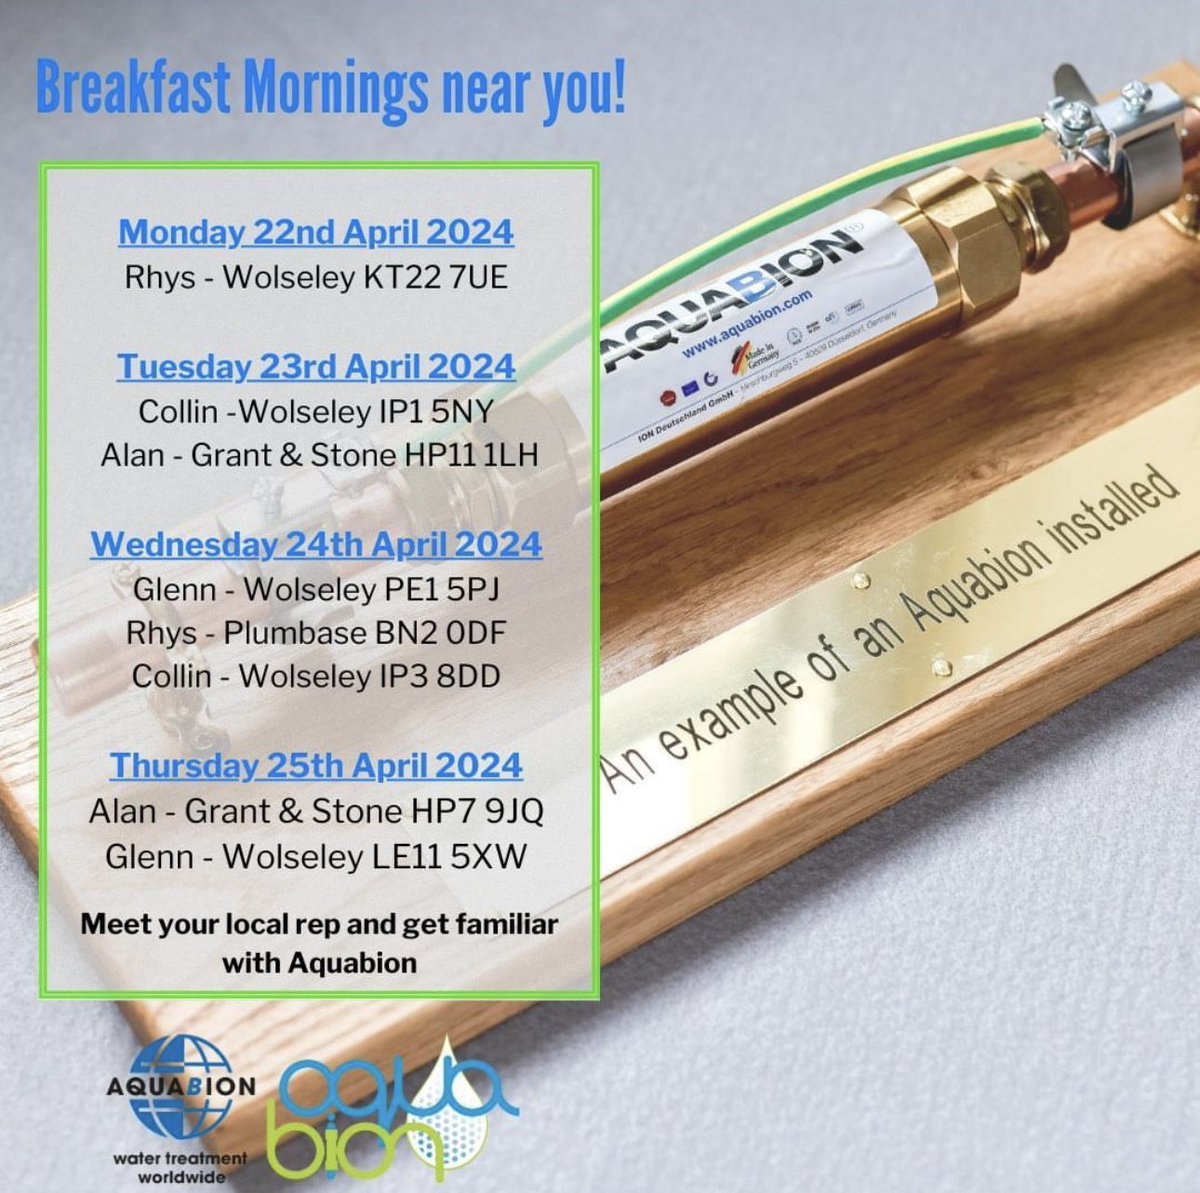 Today your AQUABION team is at 3 different breakfast mornings near you. BE THERE!!
#aquabion #breakfast #plumber #plumbing #water #watertreatment #alternative #watersoftener #